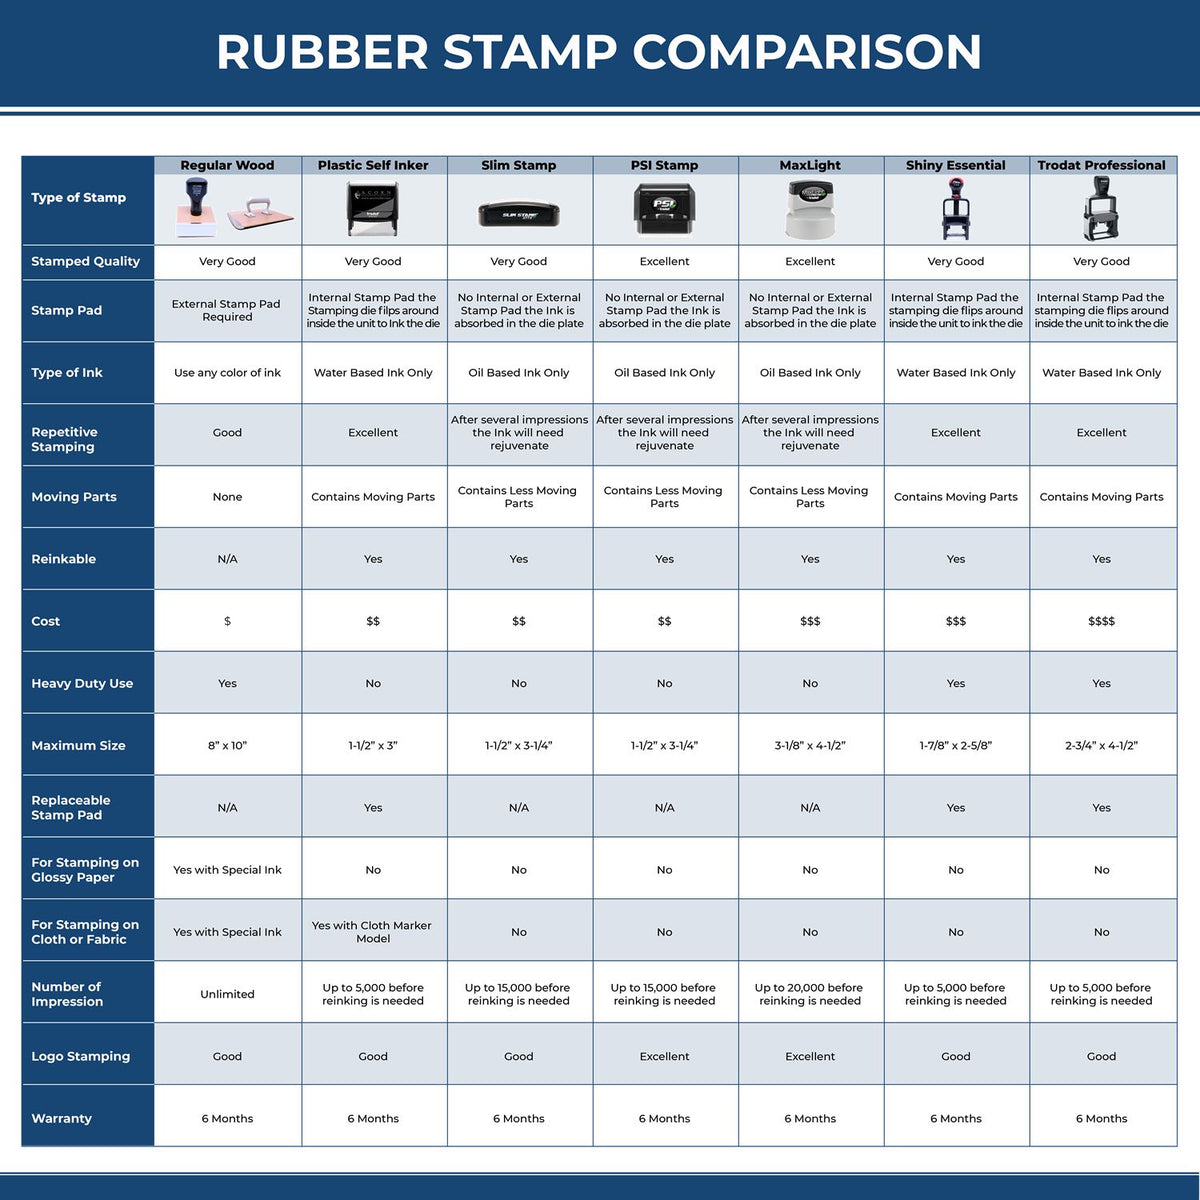 Large Self Inking Co Pay Stamp 4548S Rubber Stamp Comparison